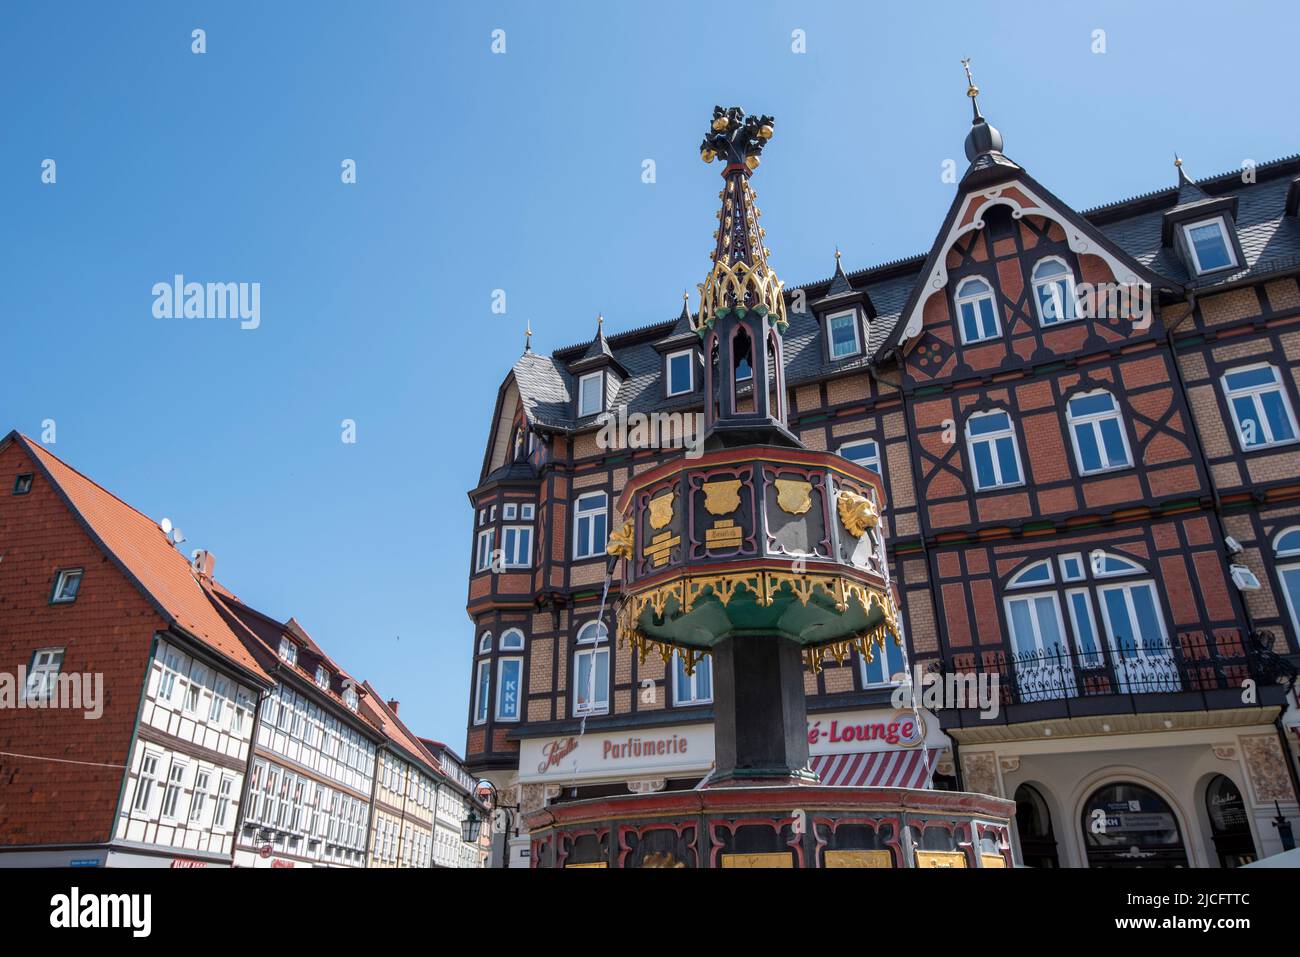 Benefactor Fountain, Old Town, Wernigerode, Harz Mountains, Saxony-Anhalt, Germany Stock Photo